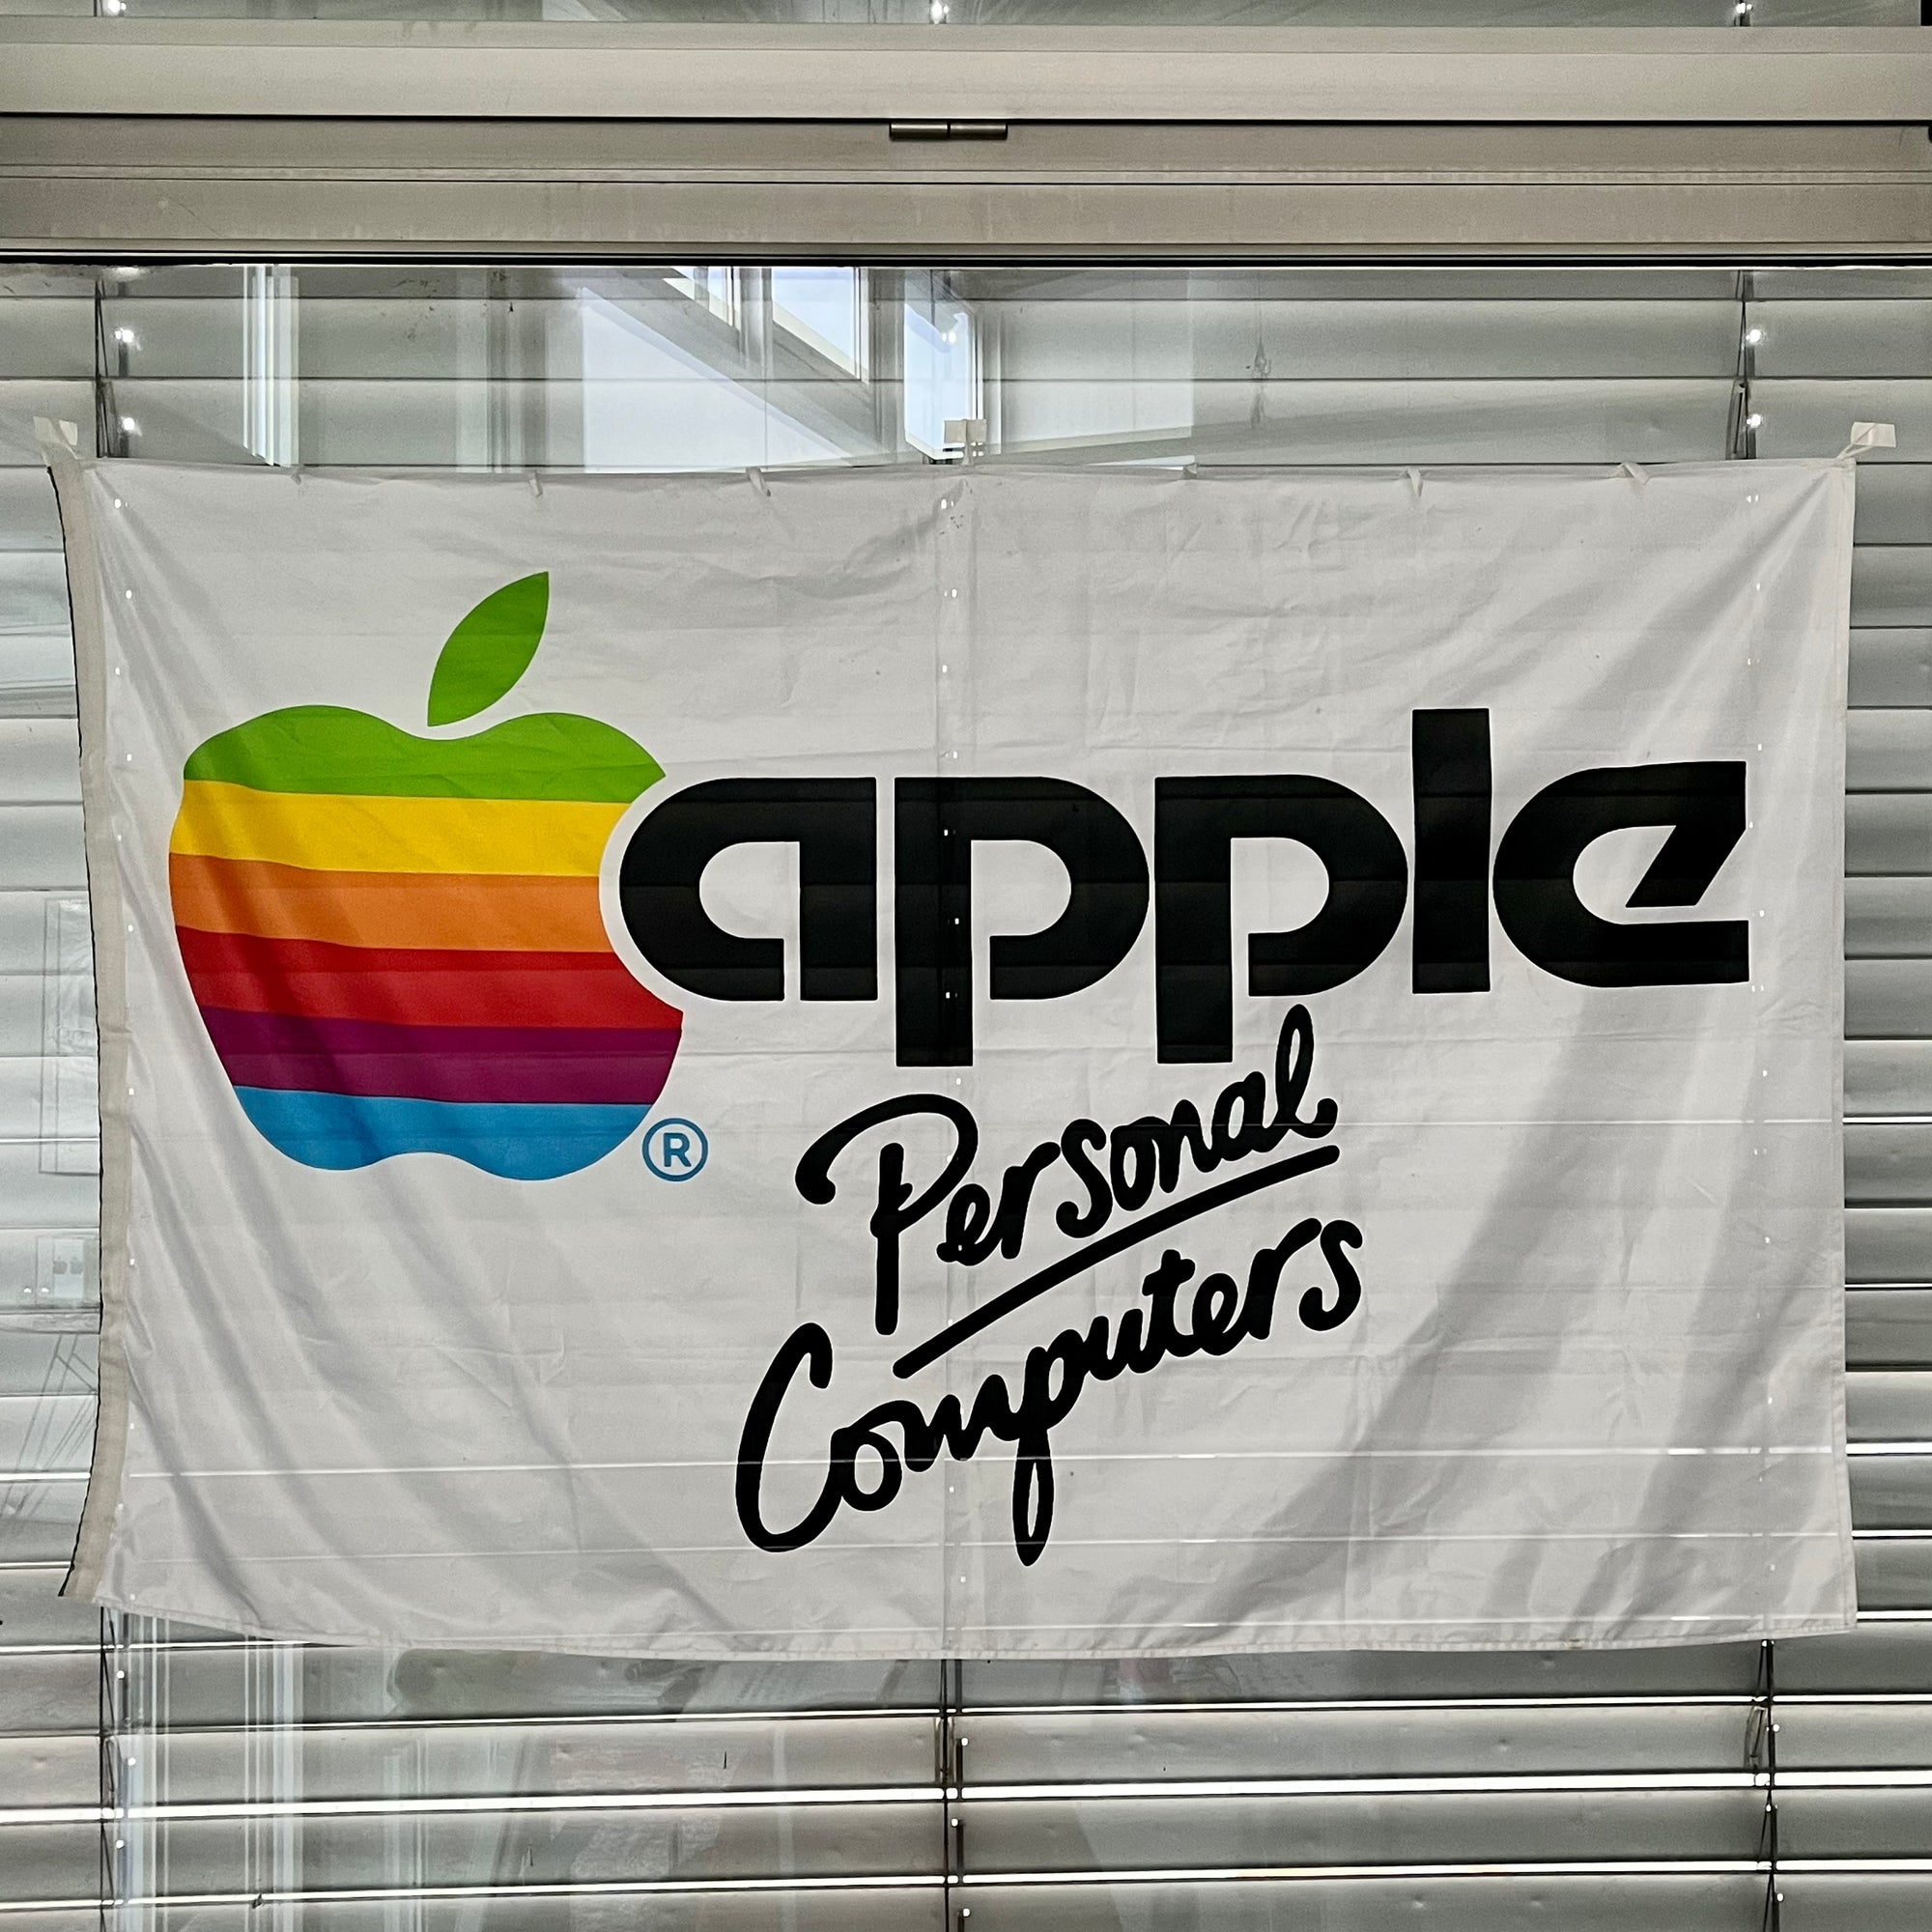 A Retro Computer Collectors Dream: Interview With Vintage Apple Store